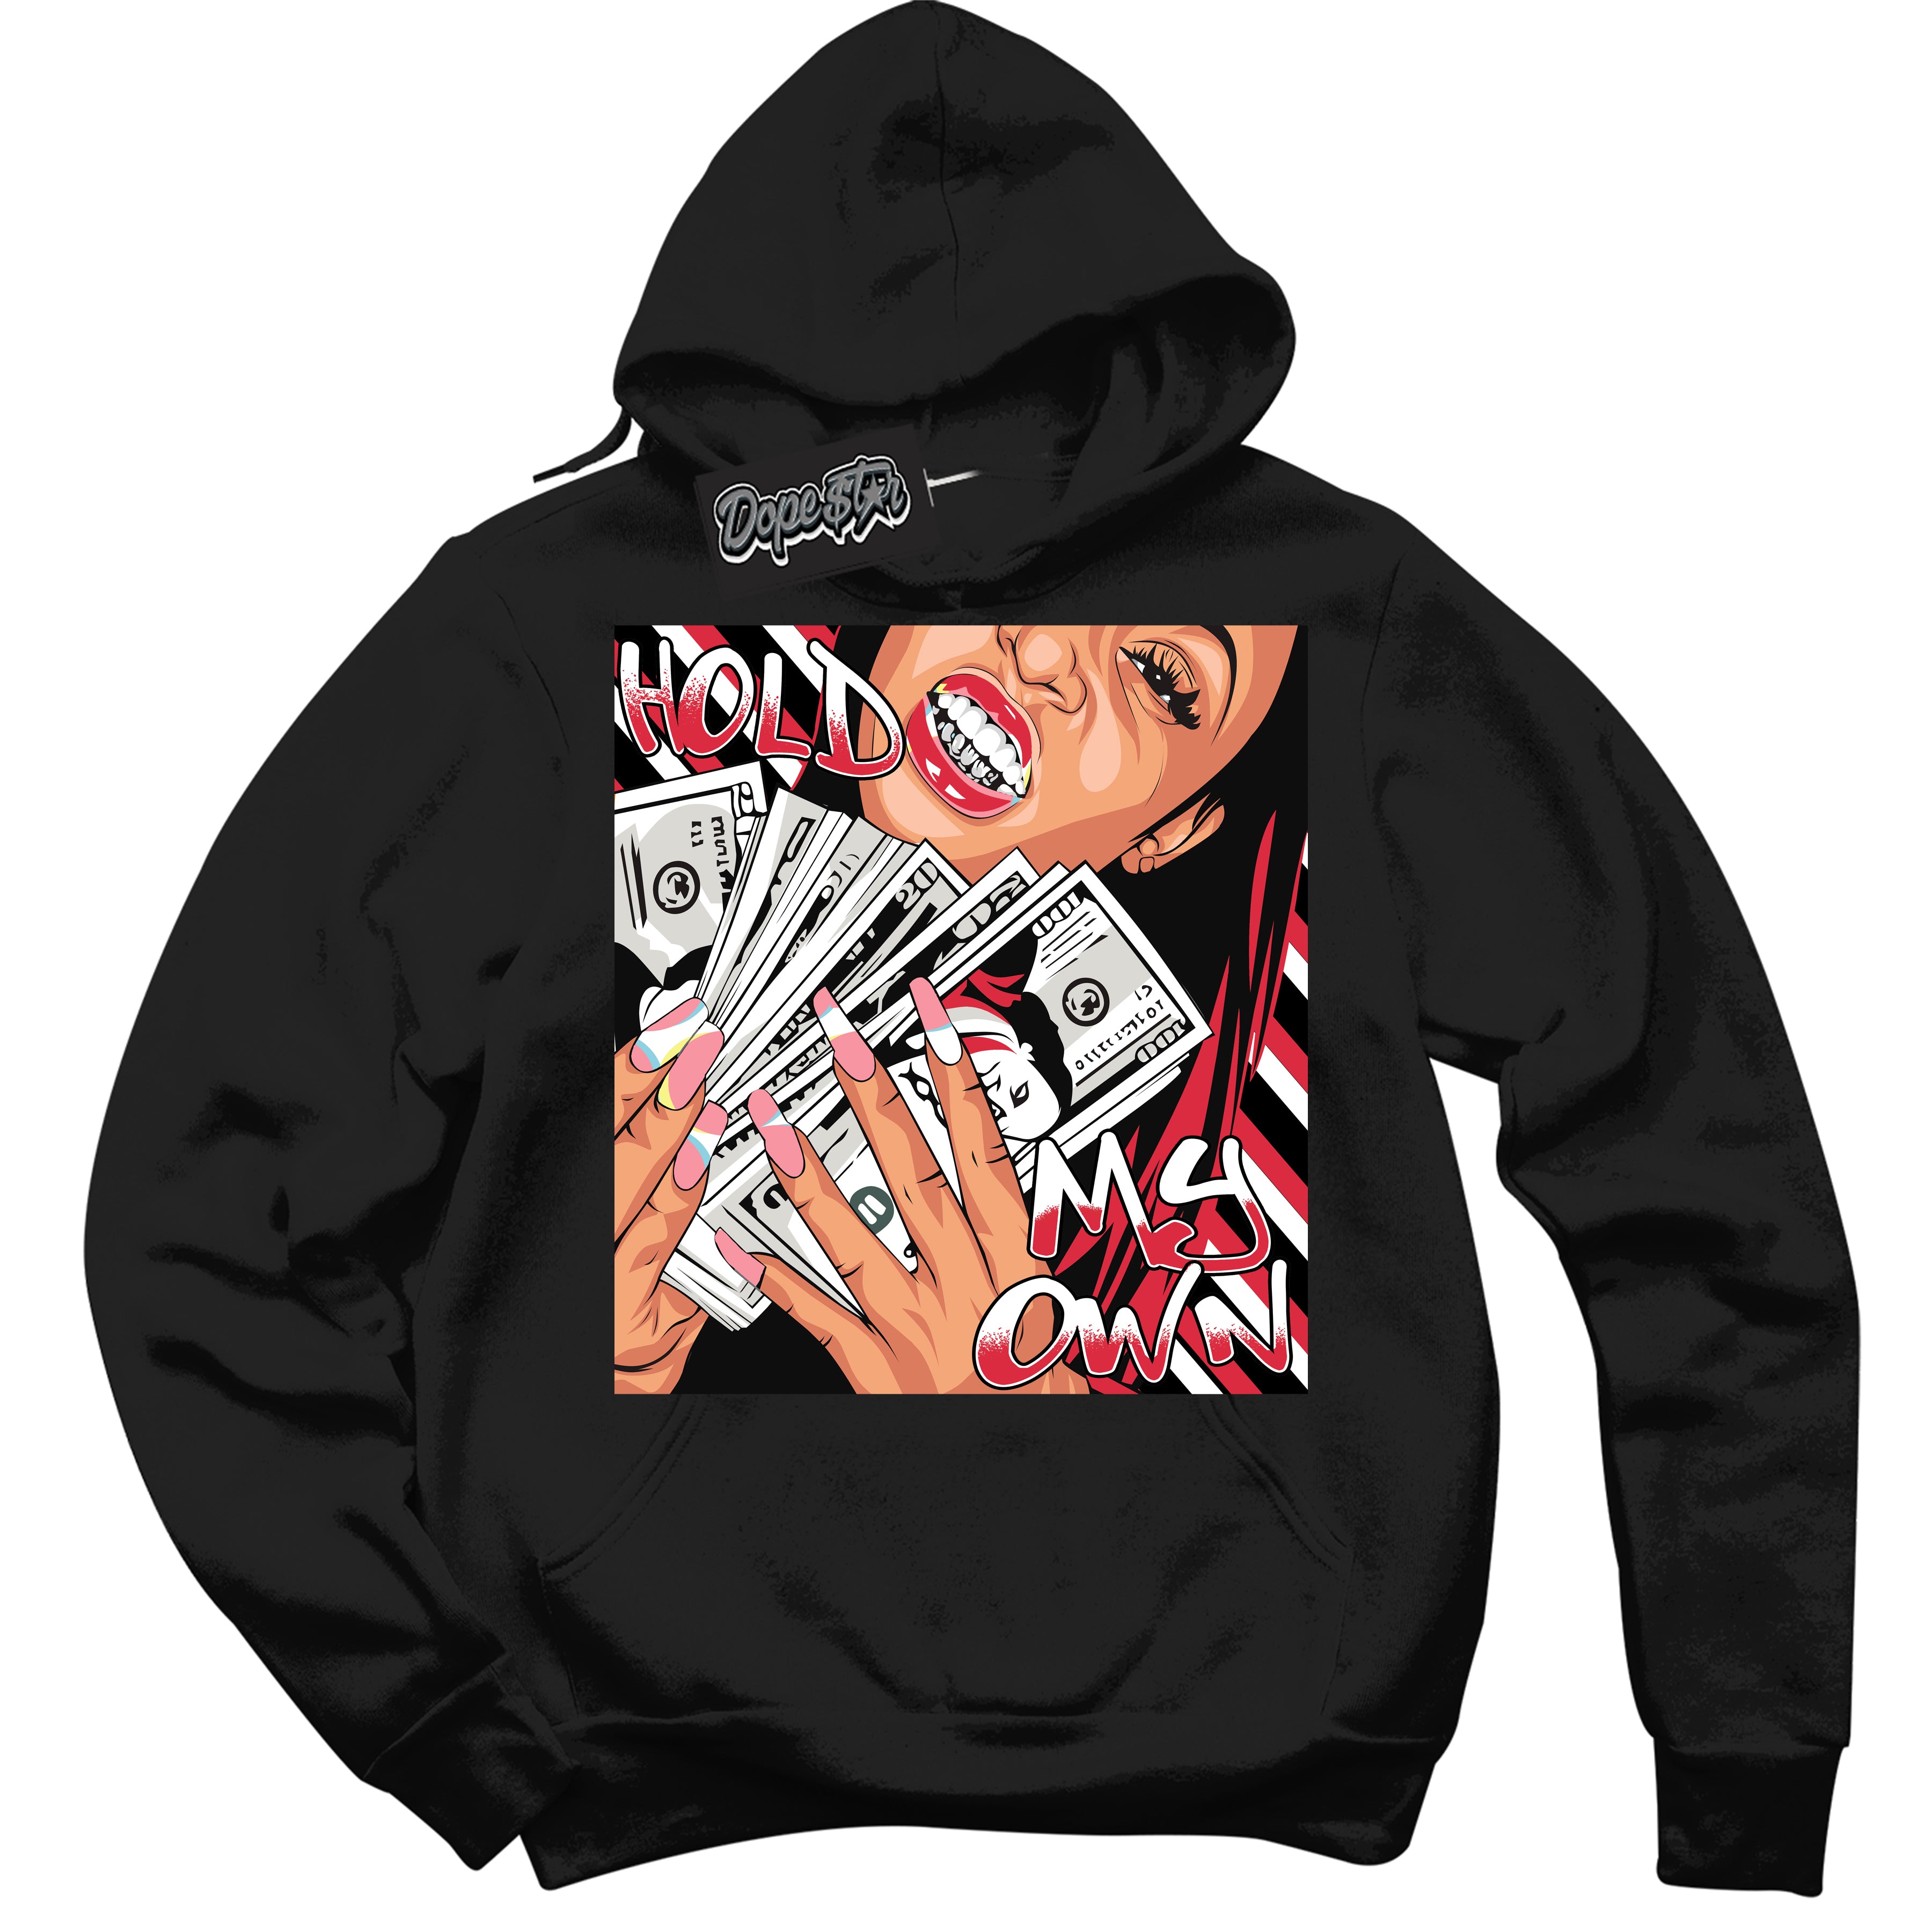 Cool Black Graphic DopeStar Hoodie with “ Hold My Own “ print, that perfectly matches Spider-Verse 1s sneakers